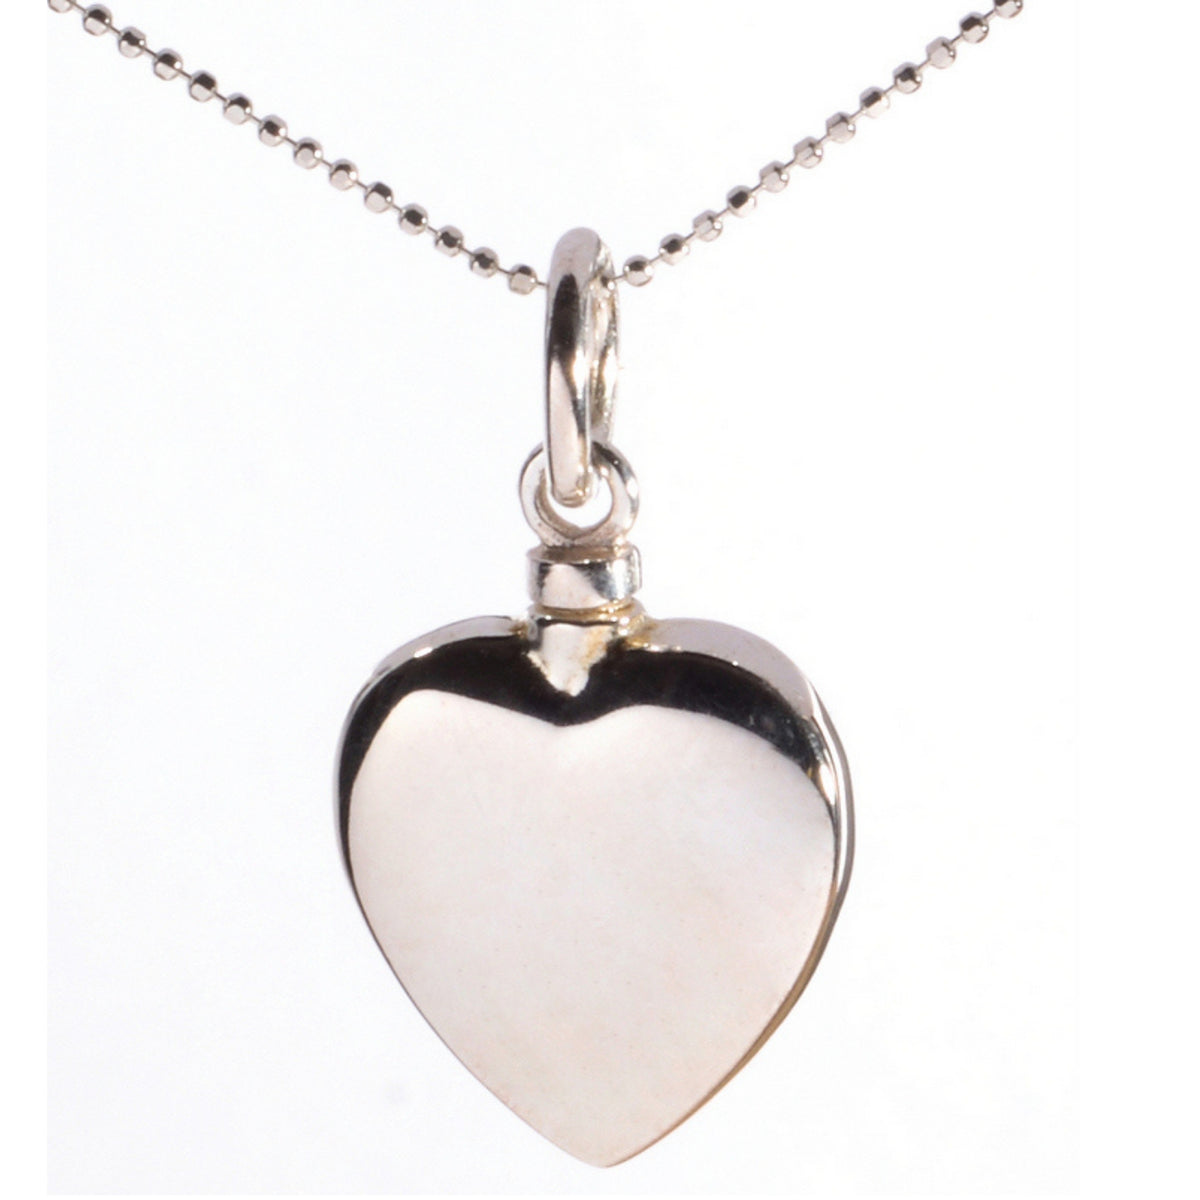 Mayfair Heart Cremation Ashes Pendant 925 Silver Urns UK